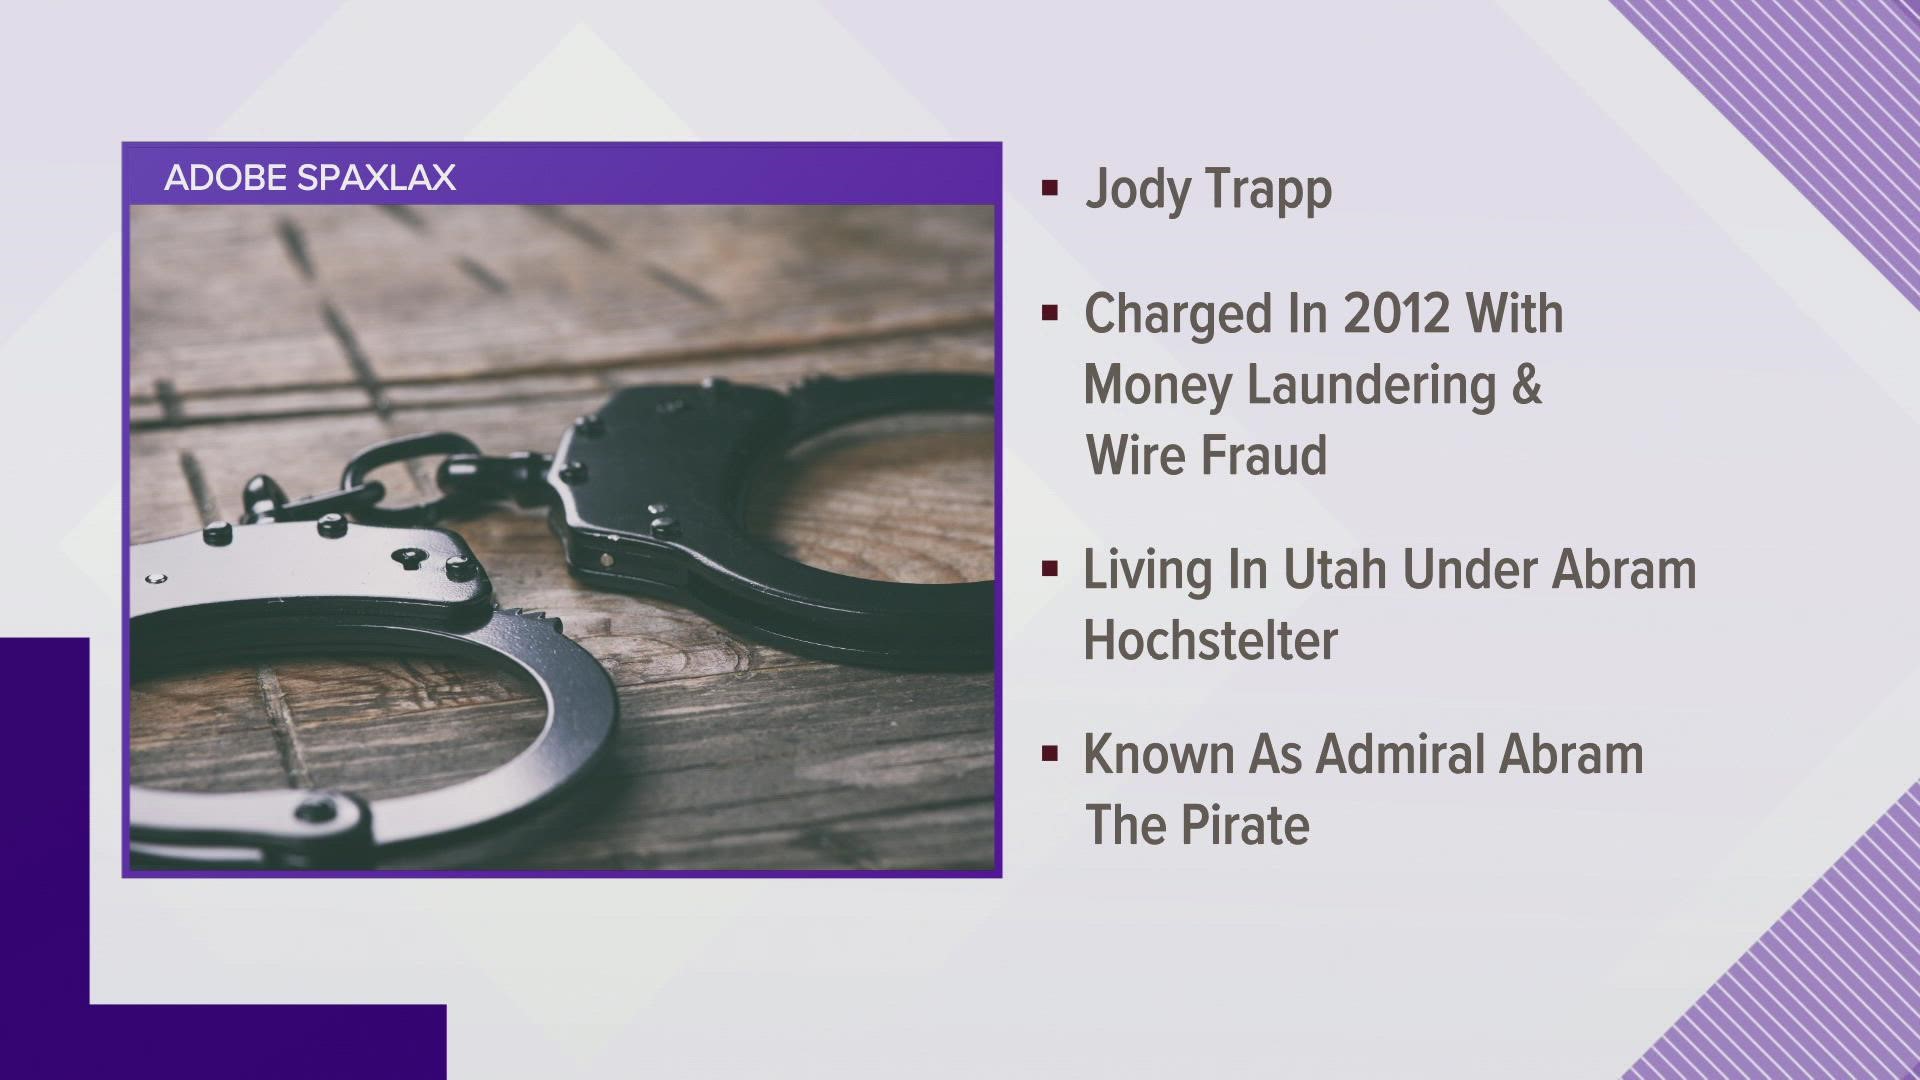 Jody Russell Trapp, who was charged with money laundering and wire fraud in 2012, was living in Utah under the assumed name of Abram Hochstelter.